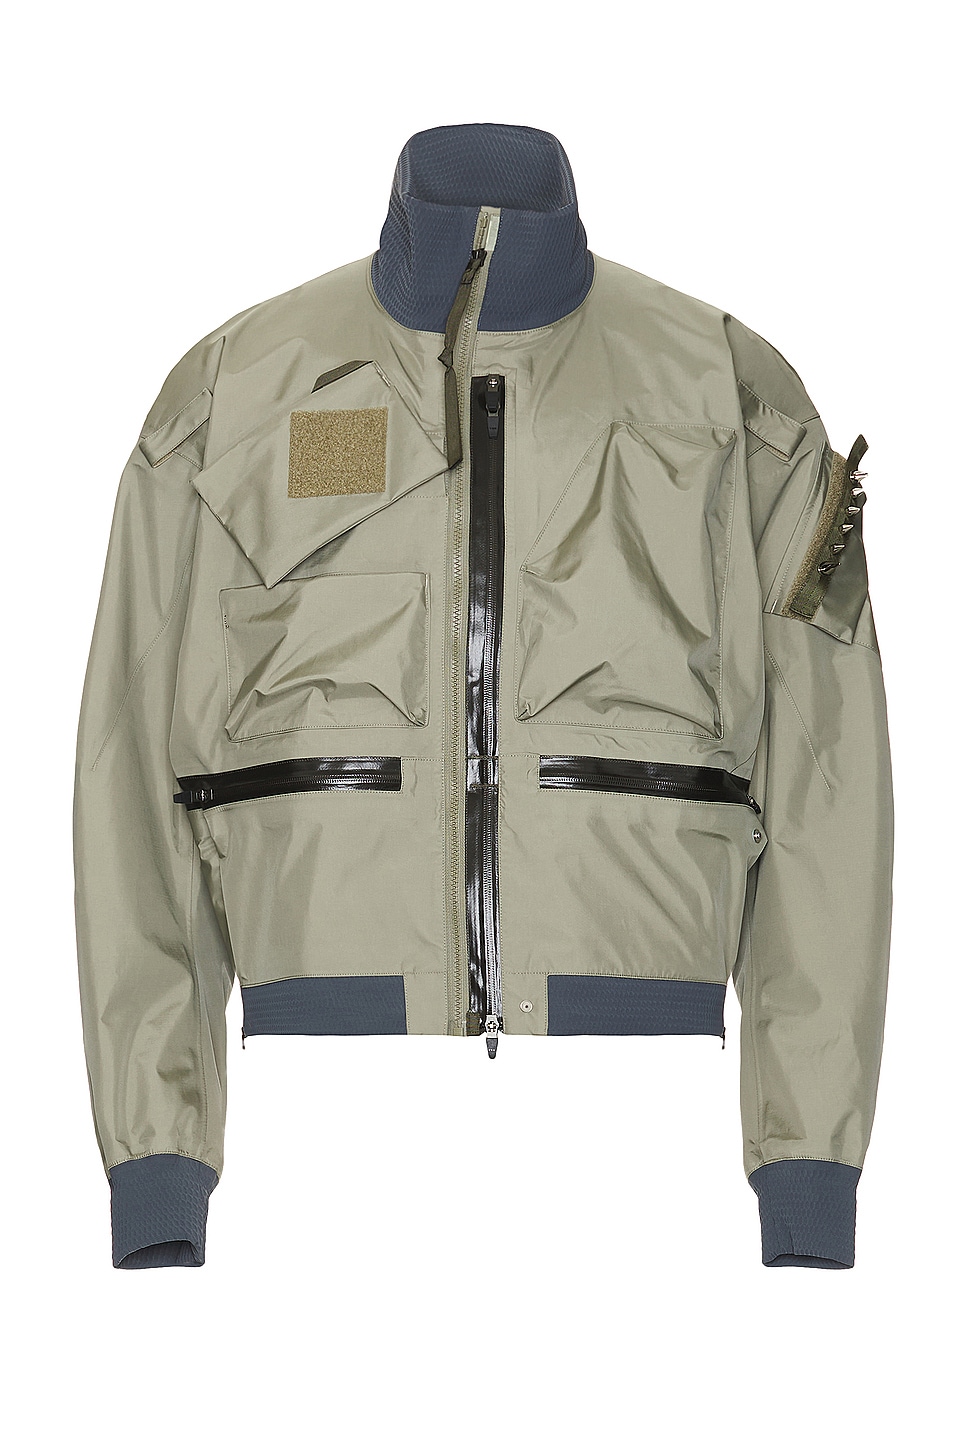 Image 1 of Acronym J123a-gt 3l Gore-tex Interops Jacket in Alpha Green